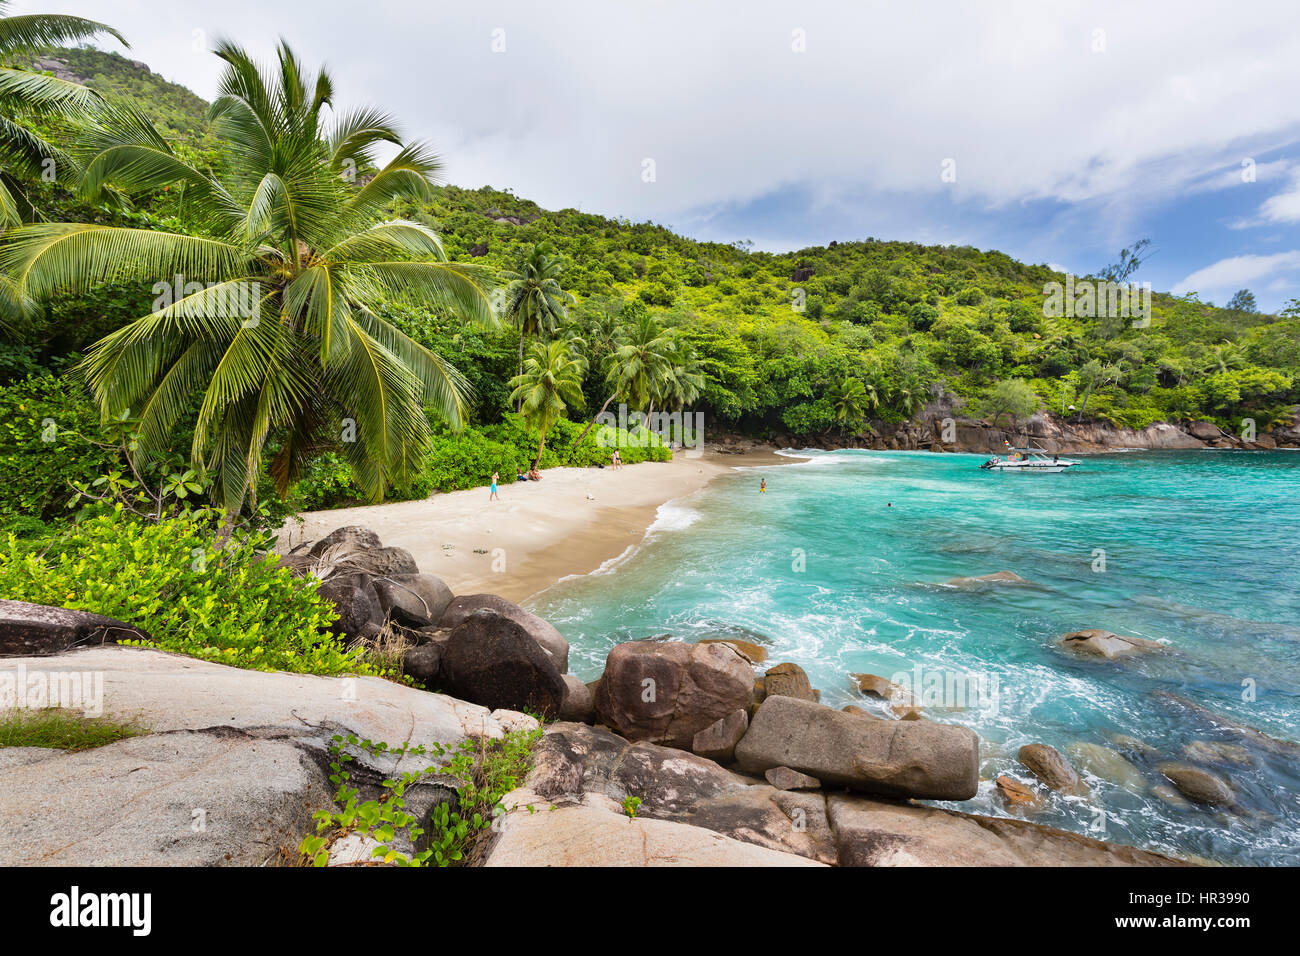 MAHE - AUGUST 06: Tourists at Anse Major in the west of Mahe, Seychelles on August 06, 2014 Stock Photo